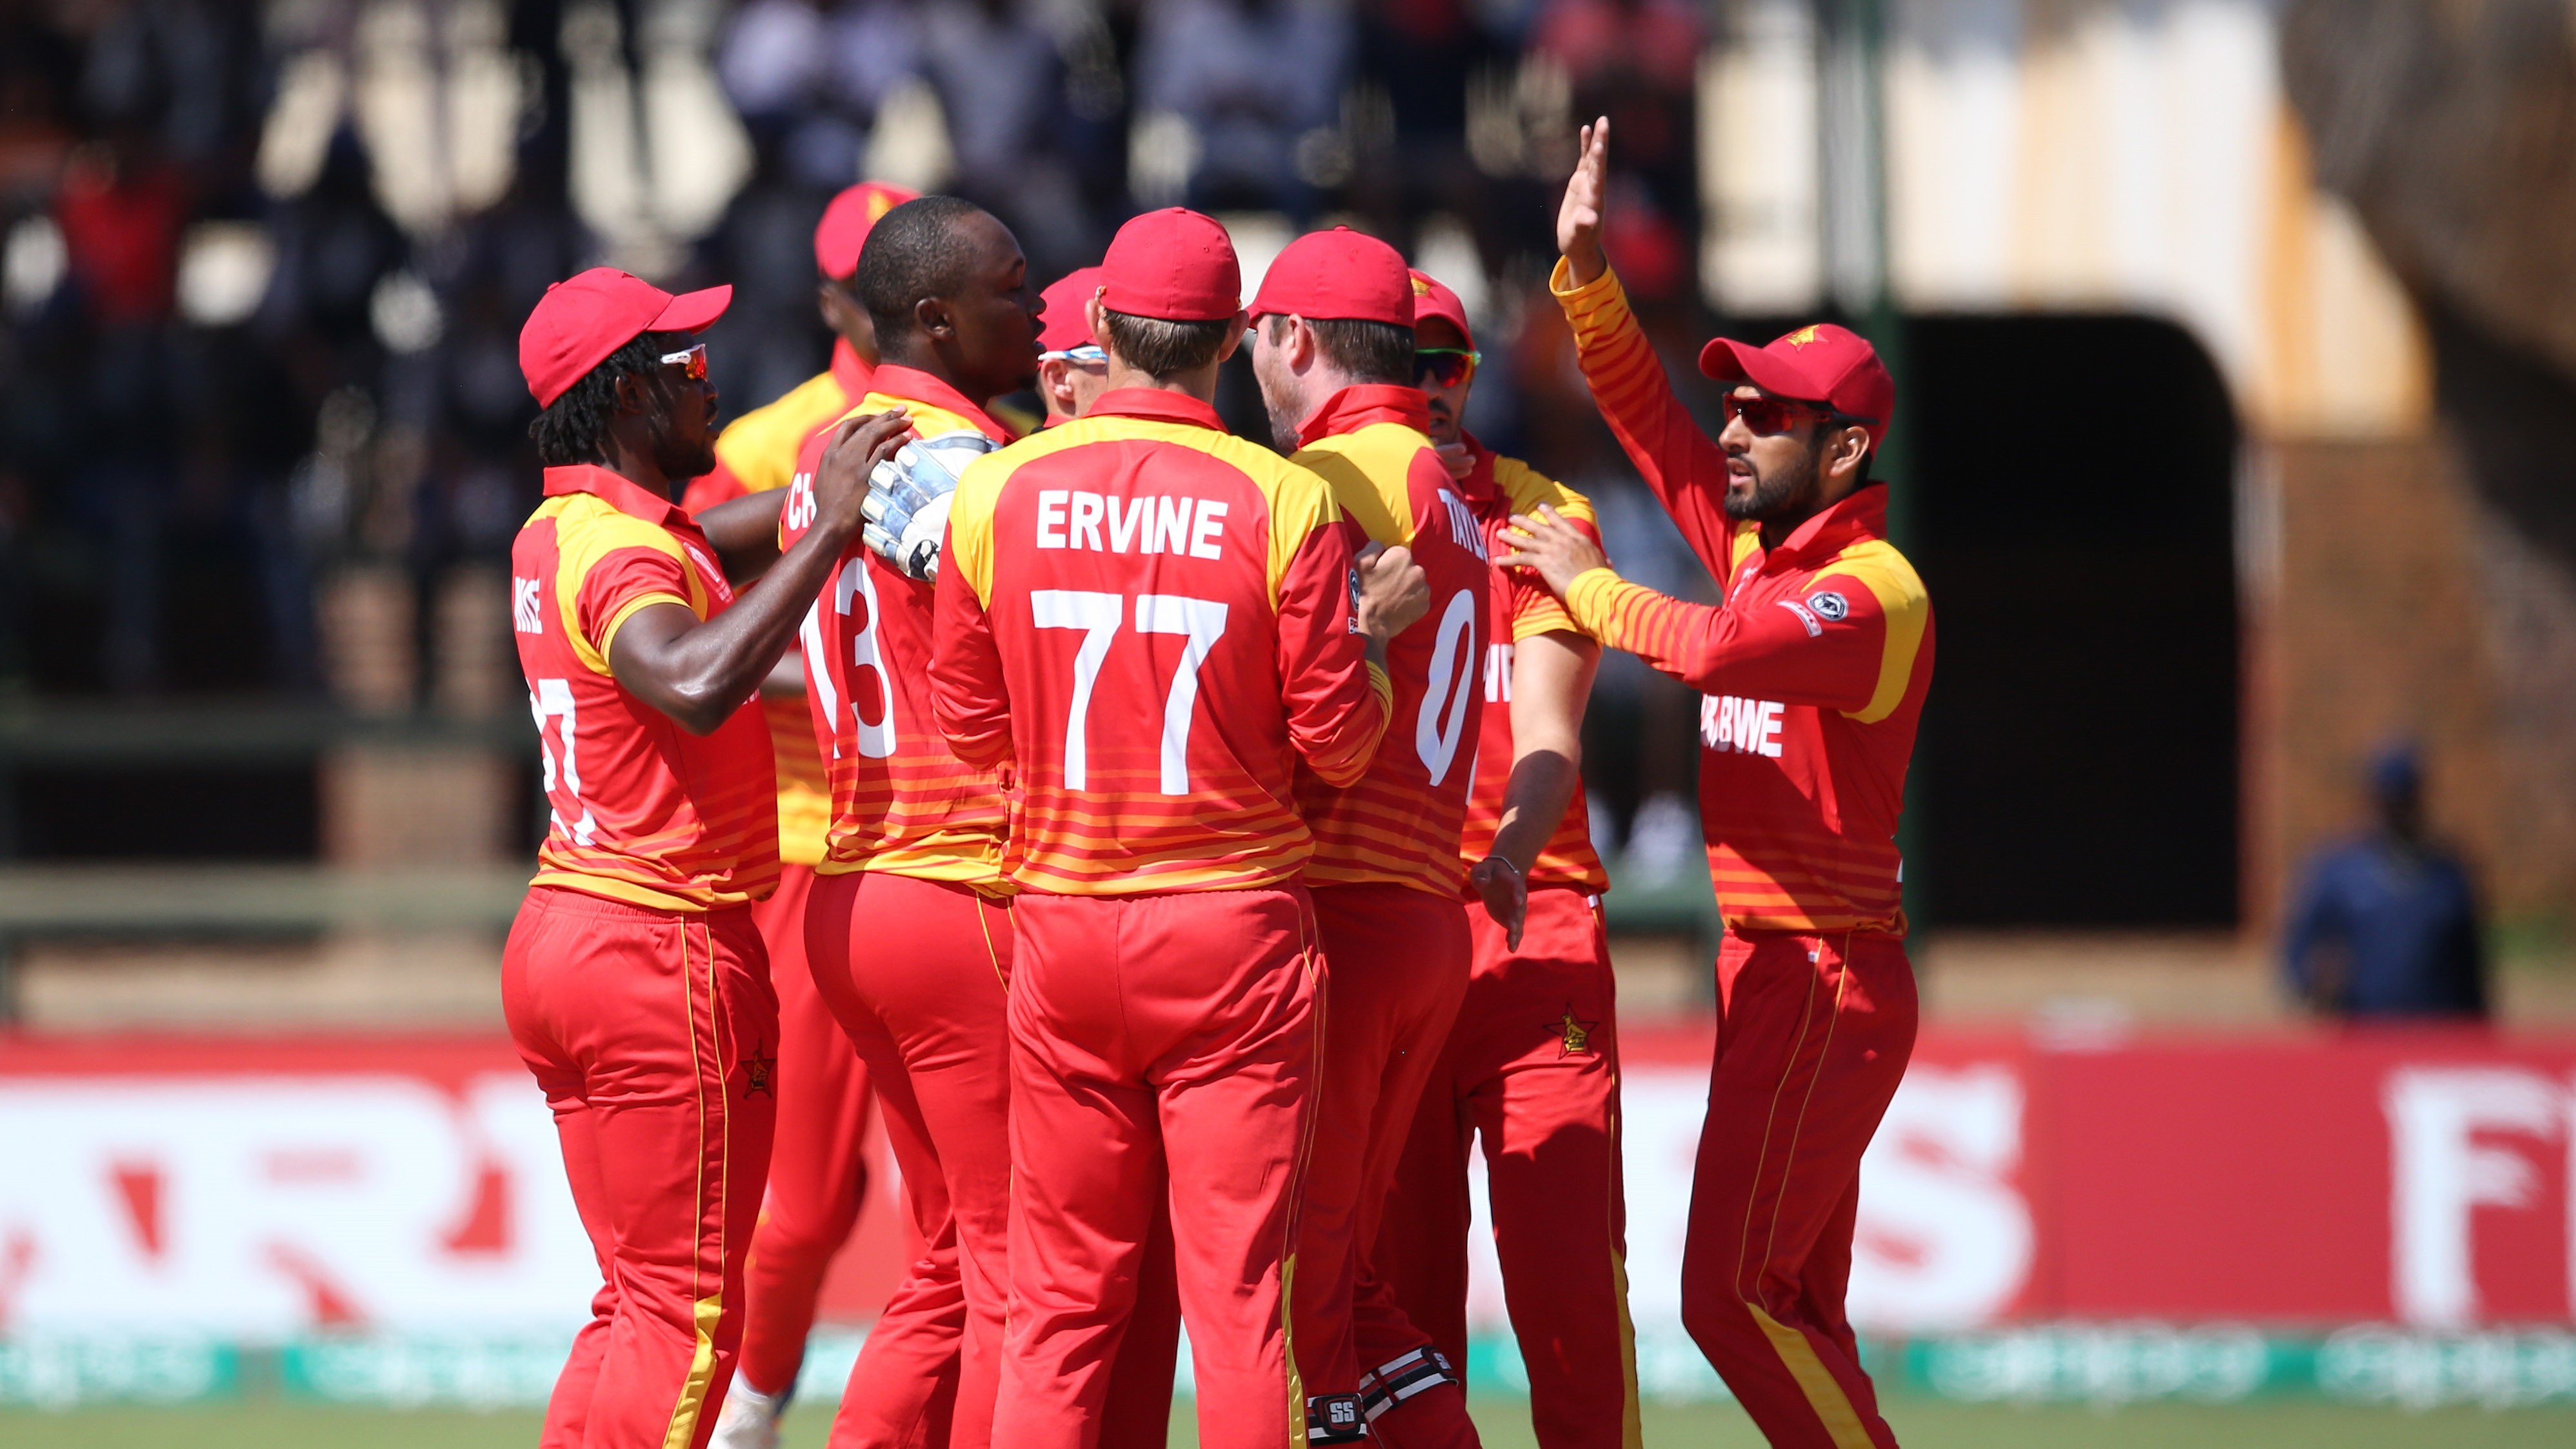 PAK v ZIM 2020: Two Zimbabwe cricketers and support staff test positive for COVID-19